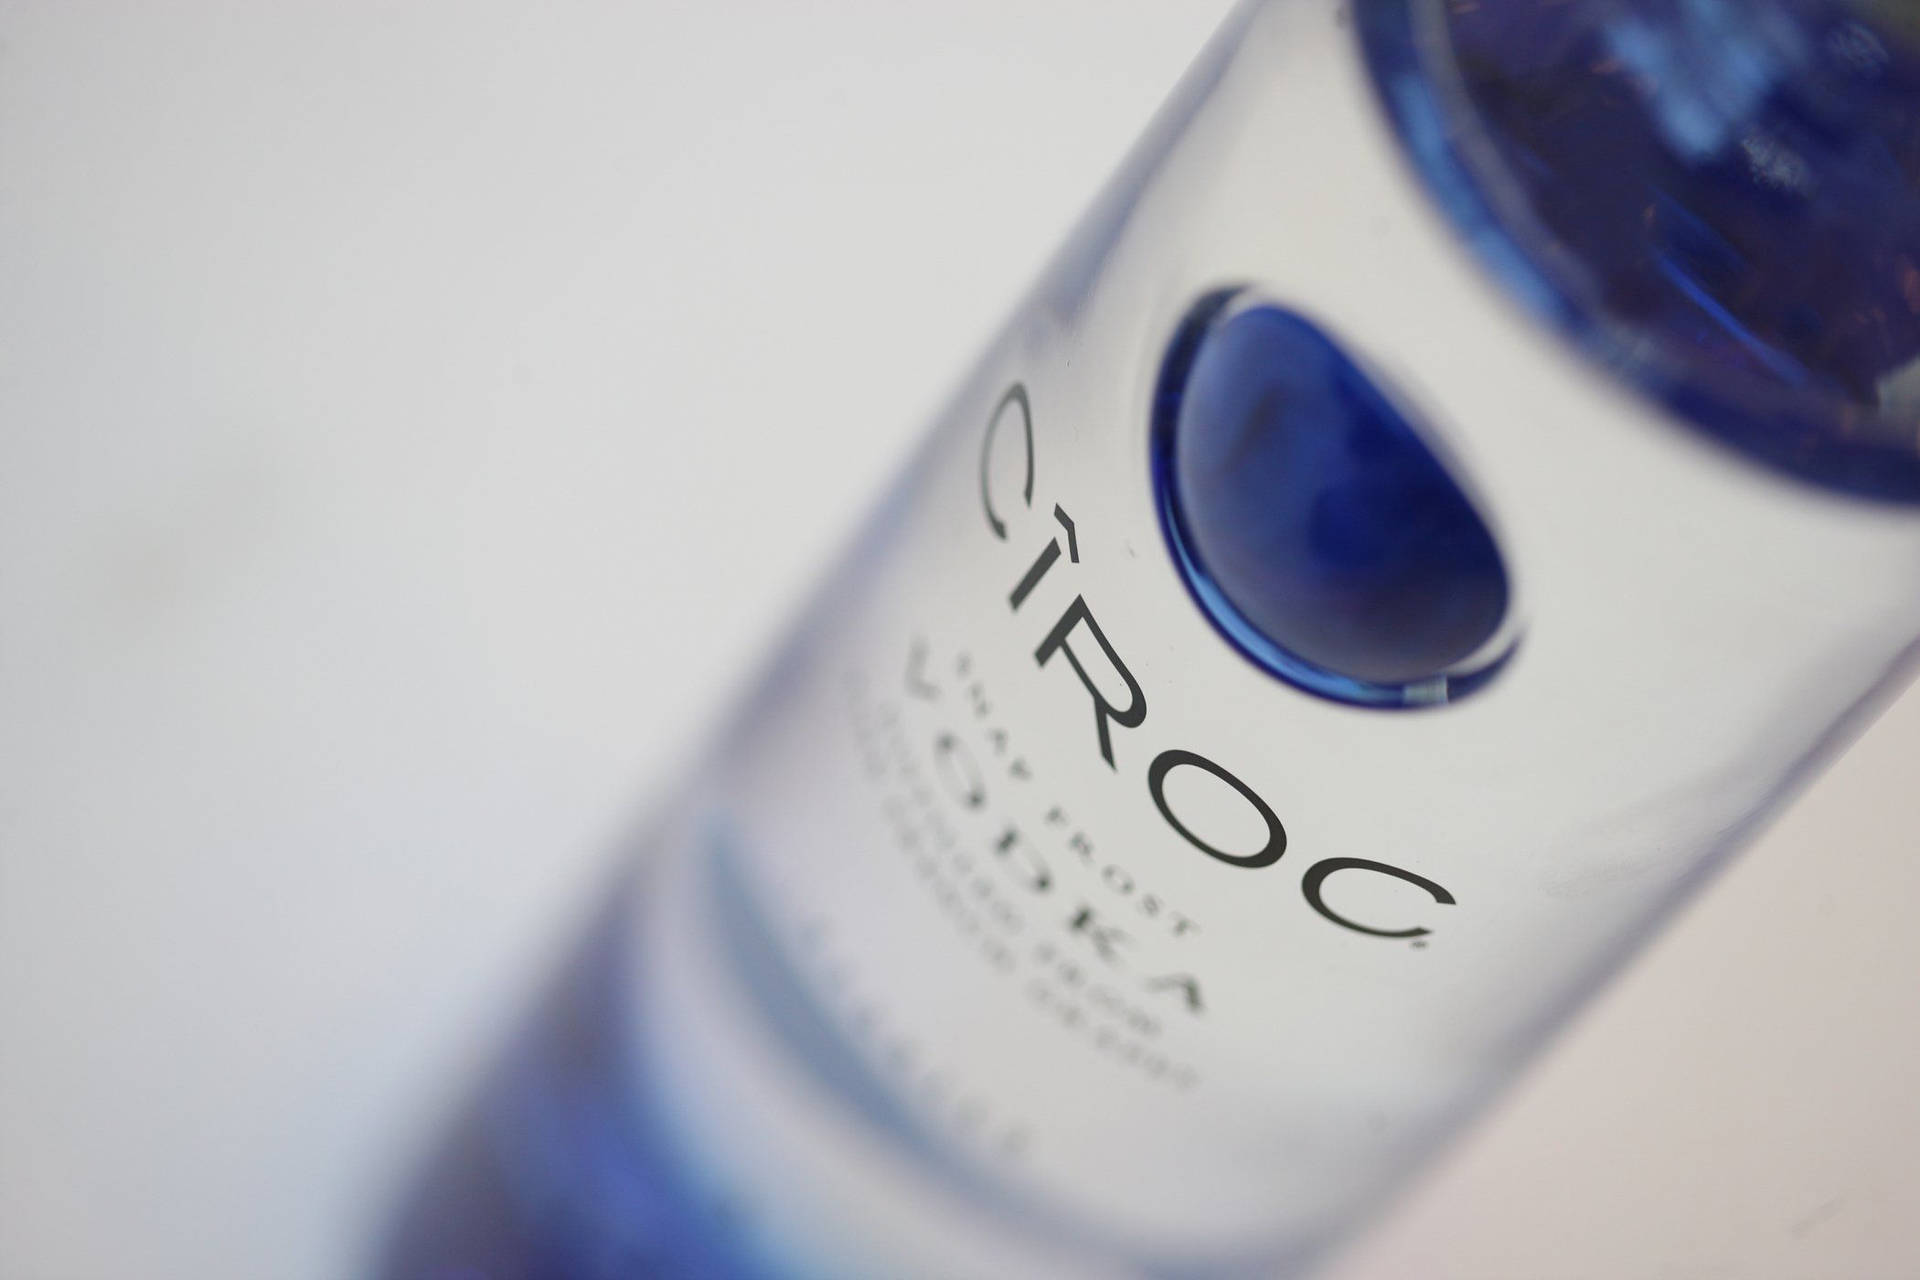 Ciroc French Vodka Bottle from High Angle View Wallpaper